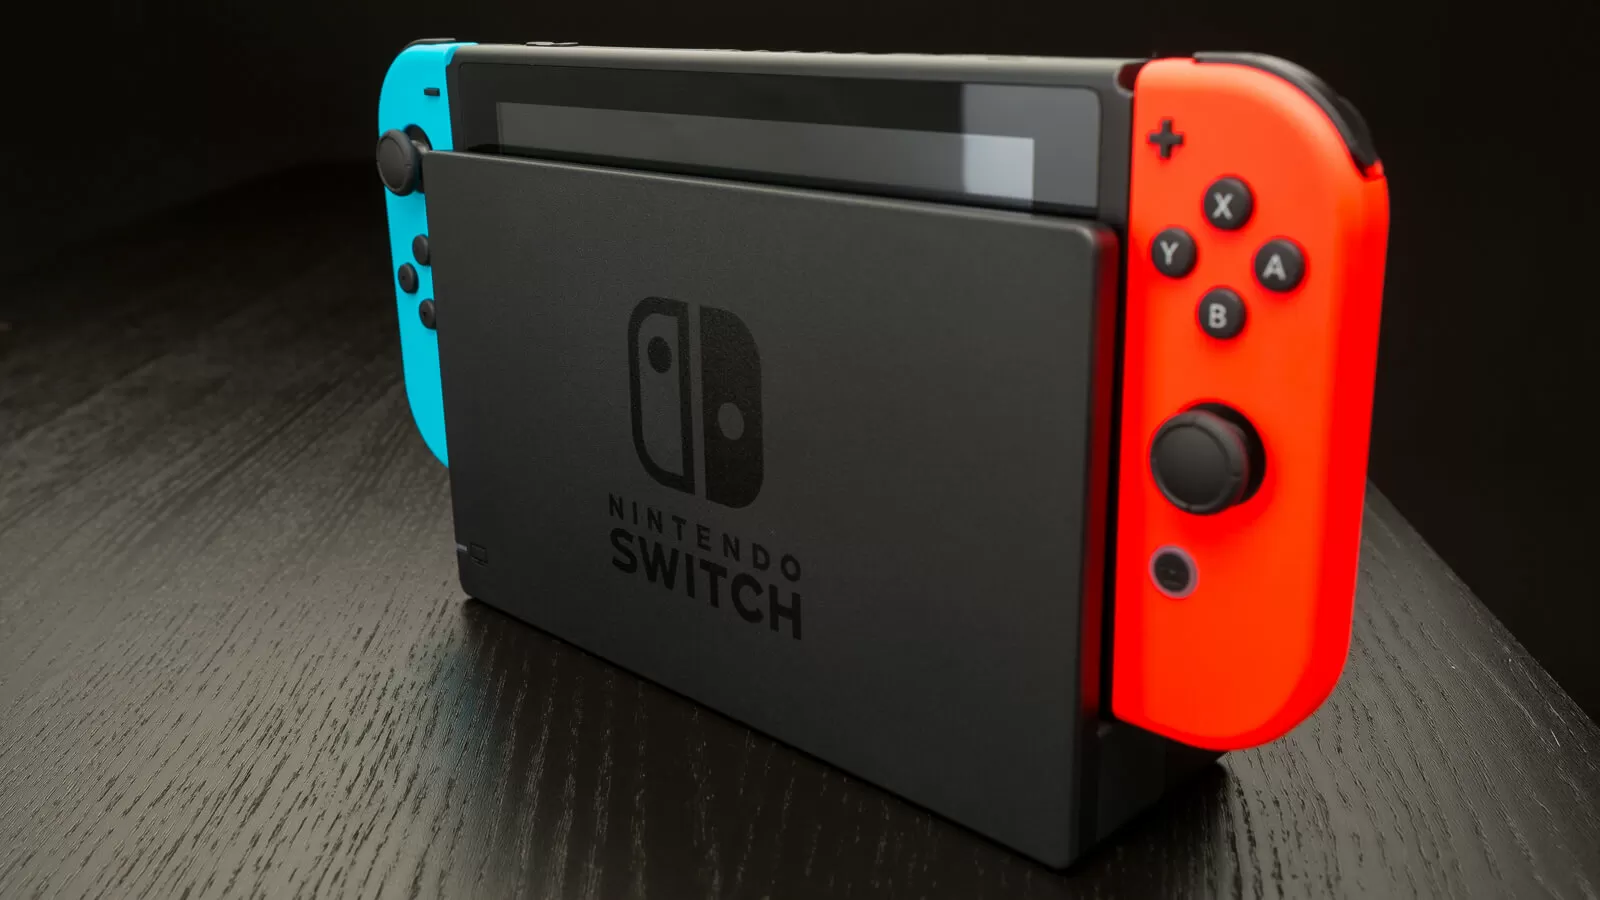 Nintendo's Switch is the fastest-selling game console in US history